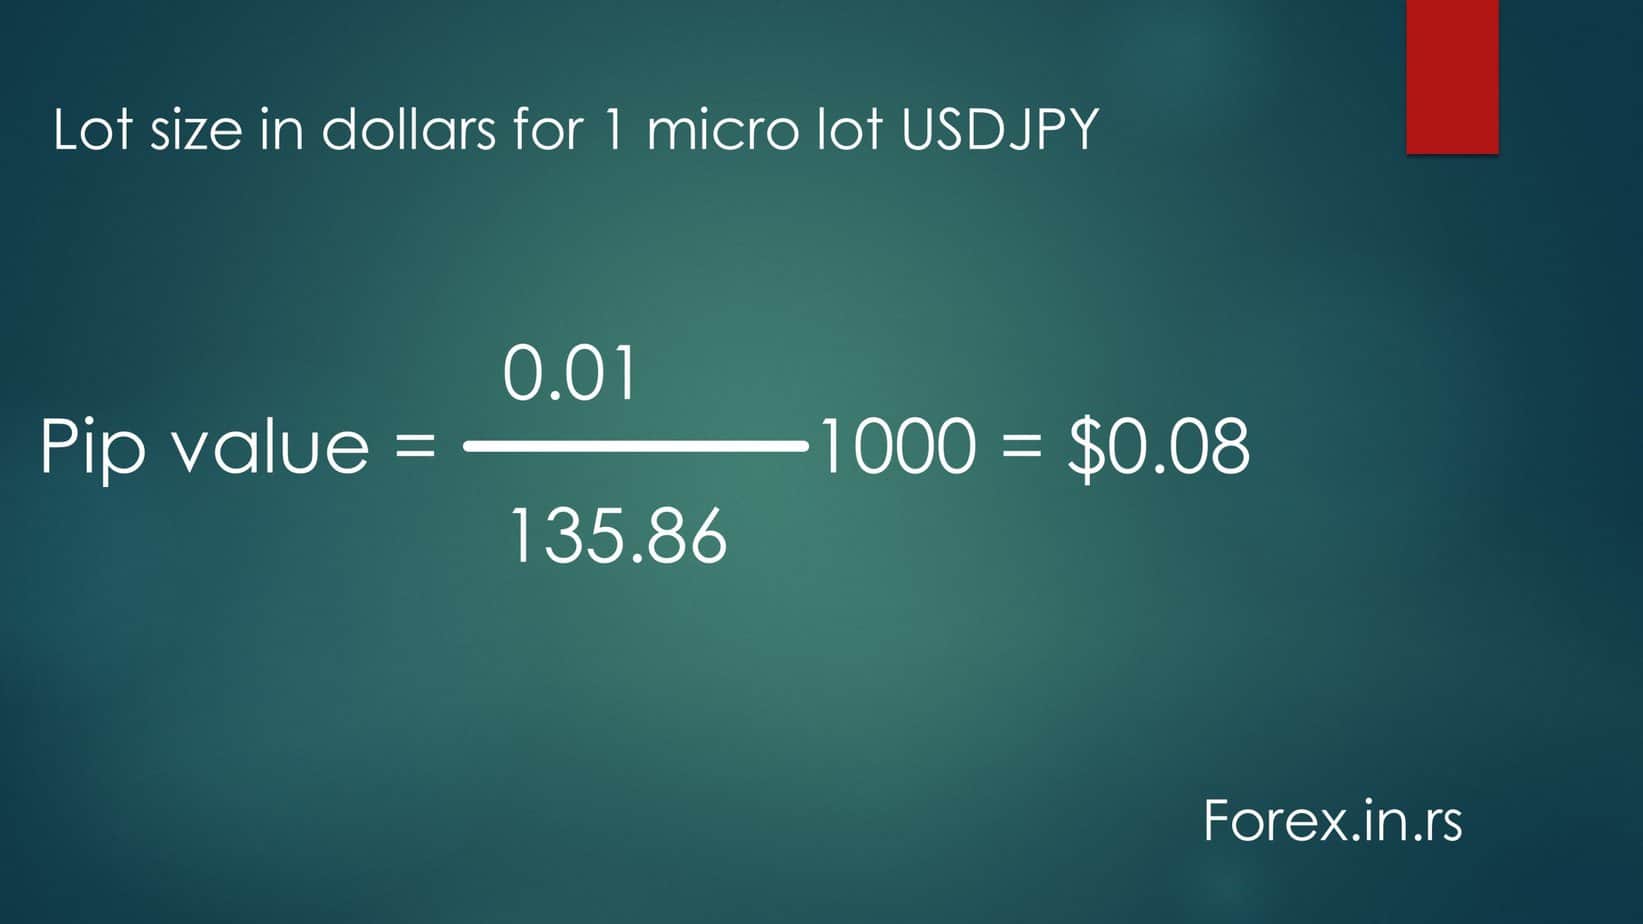 formula to calculate 1 micro lot in dollars for usdjpy